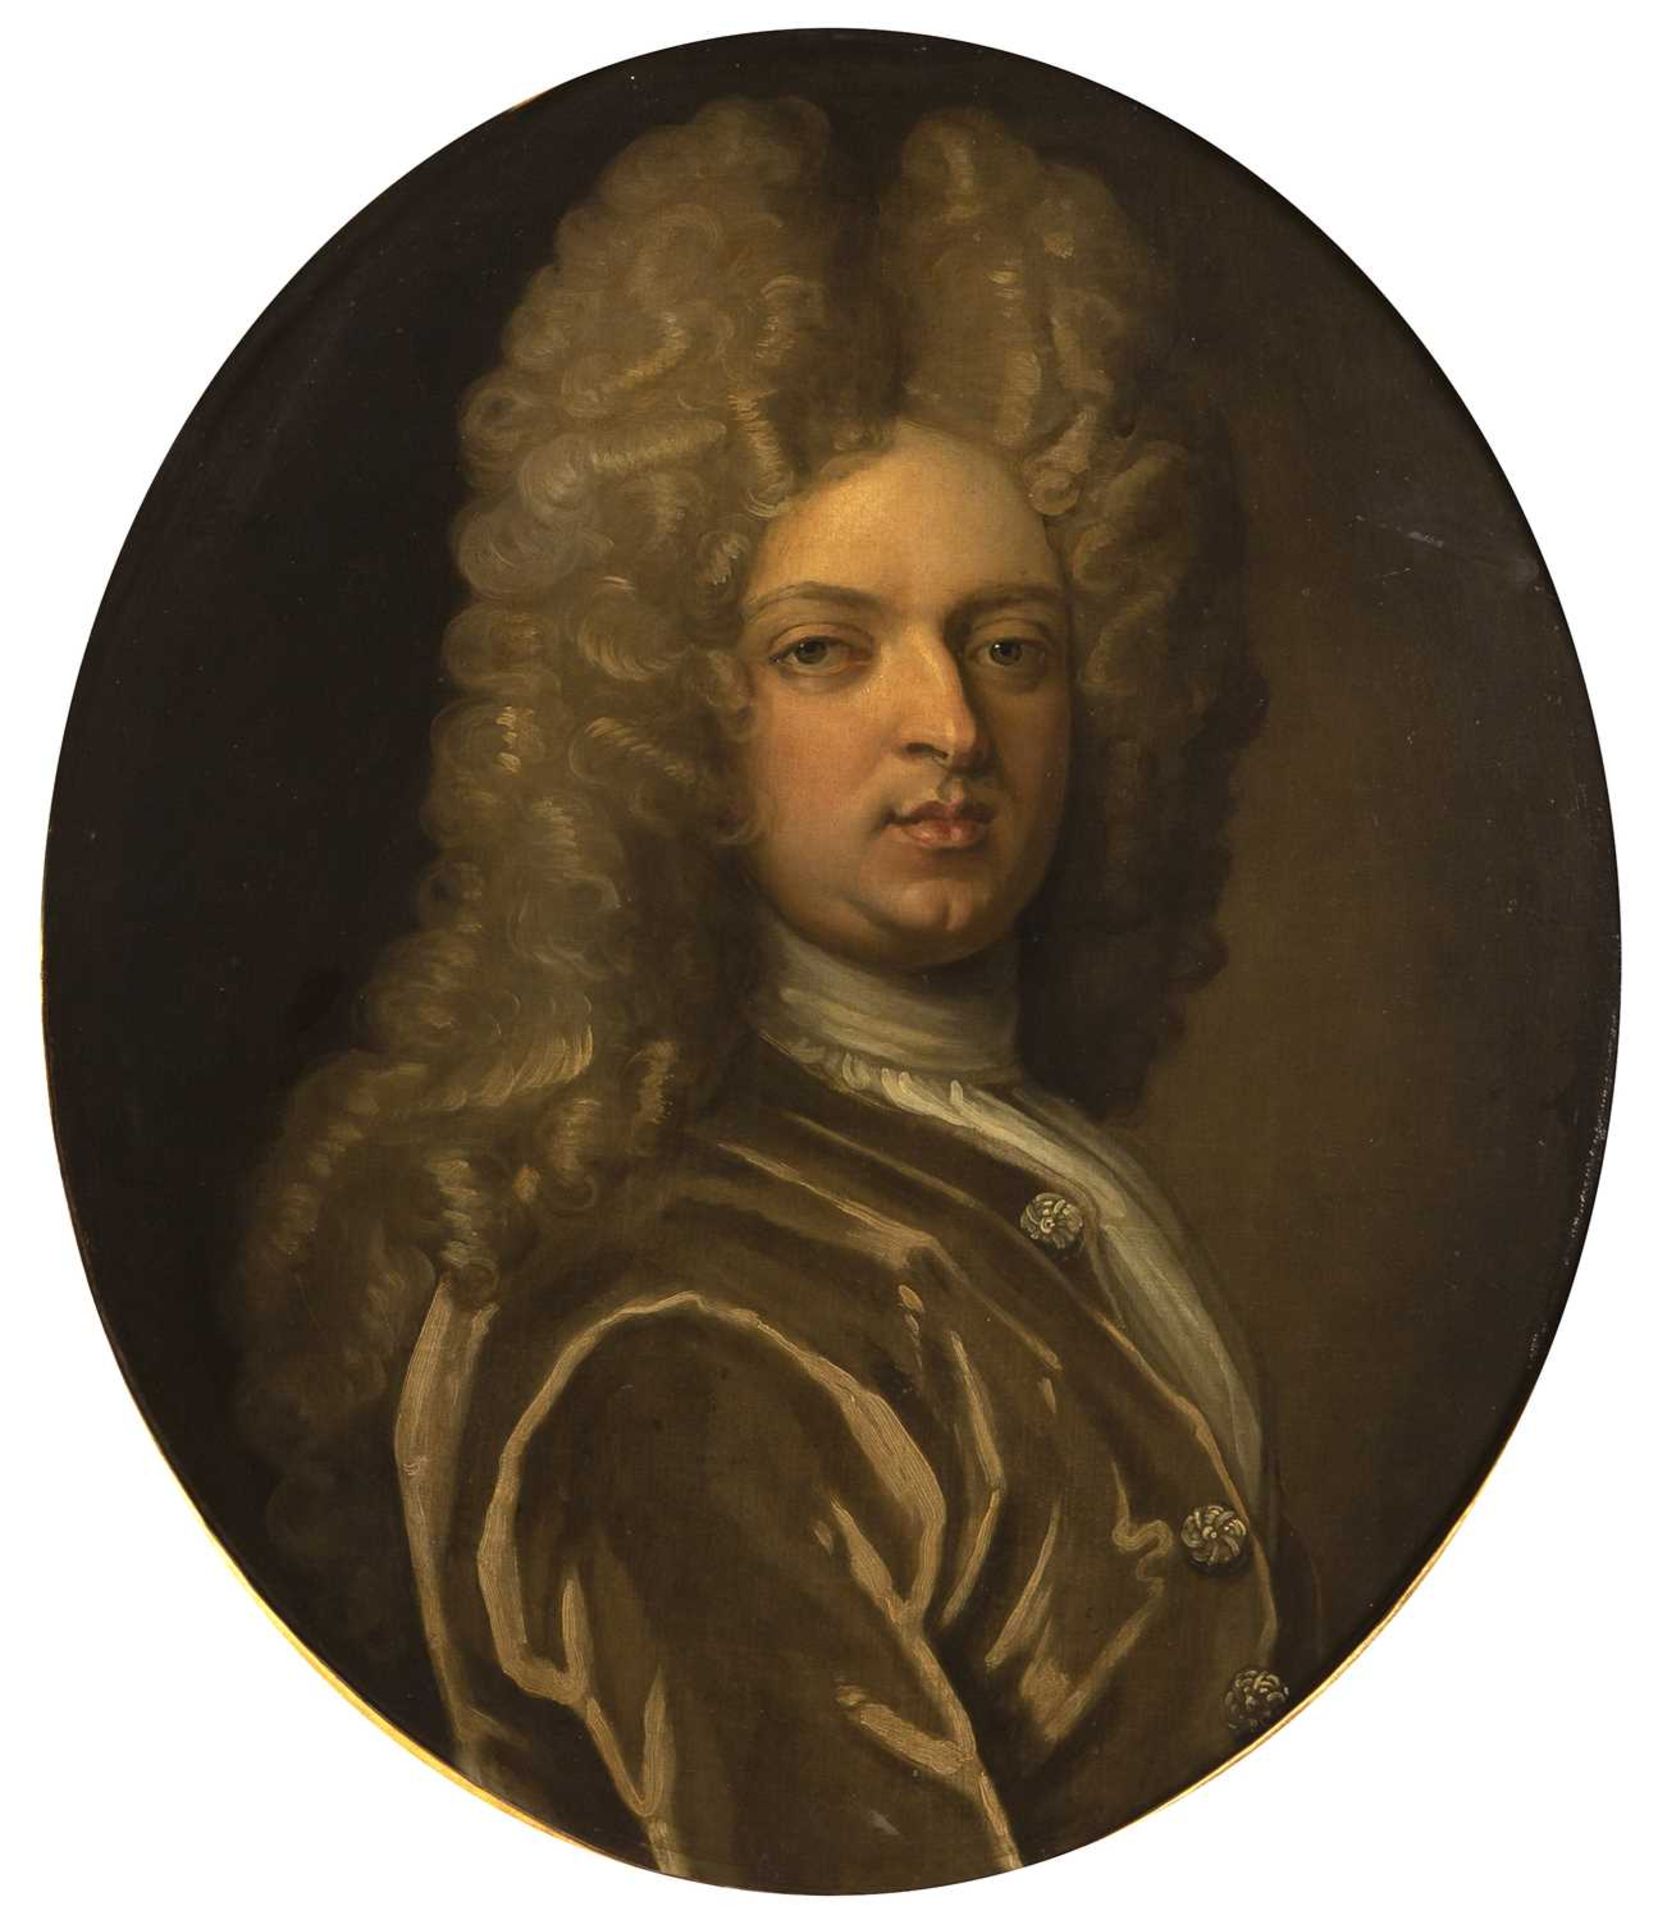 After Godfrey Kneller (1646-1723) Oval portrait of a nobleman wearing a green frockcoat, oil on